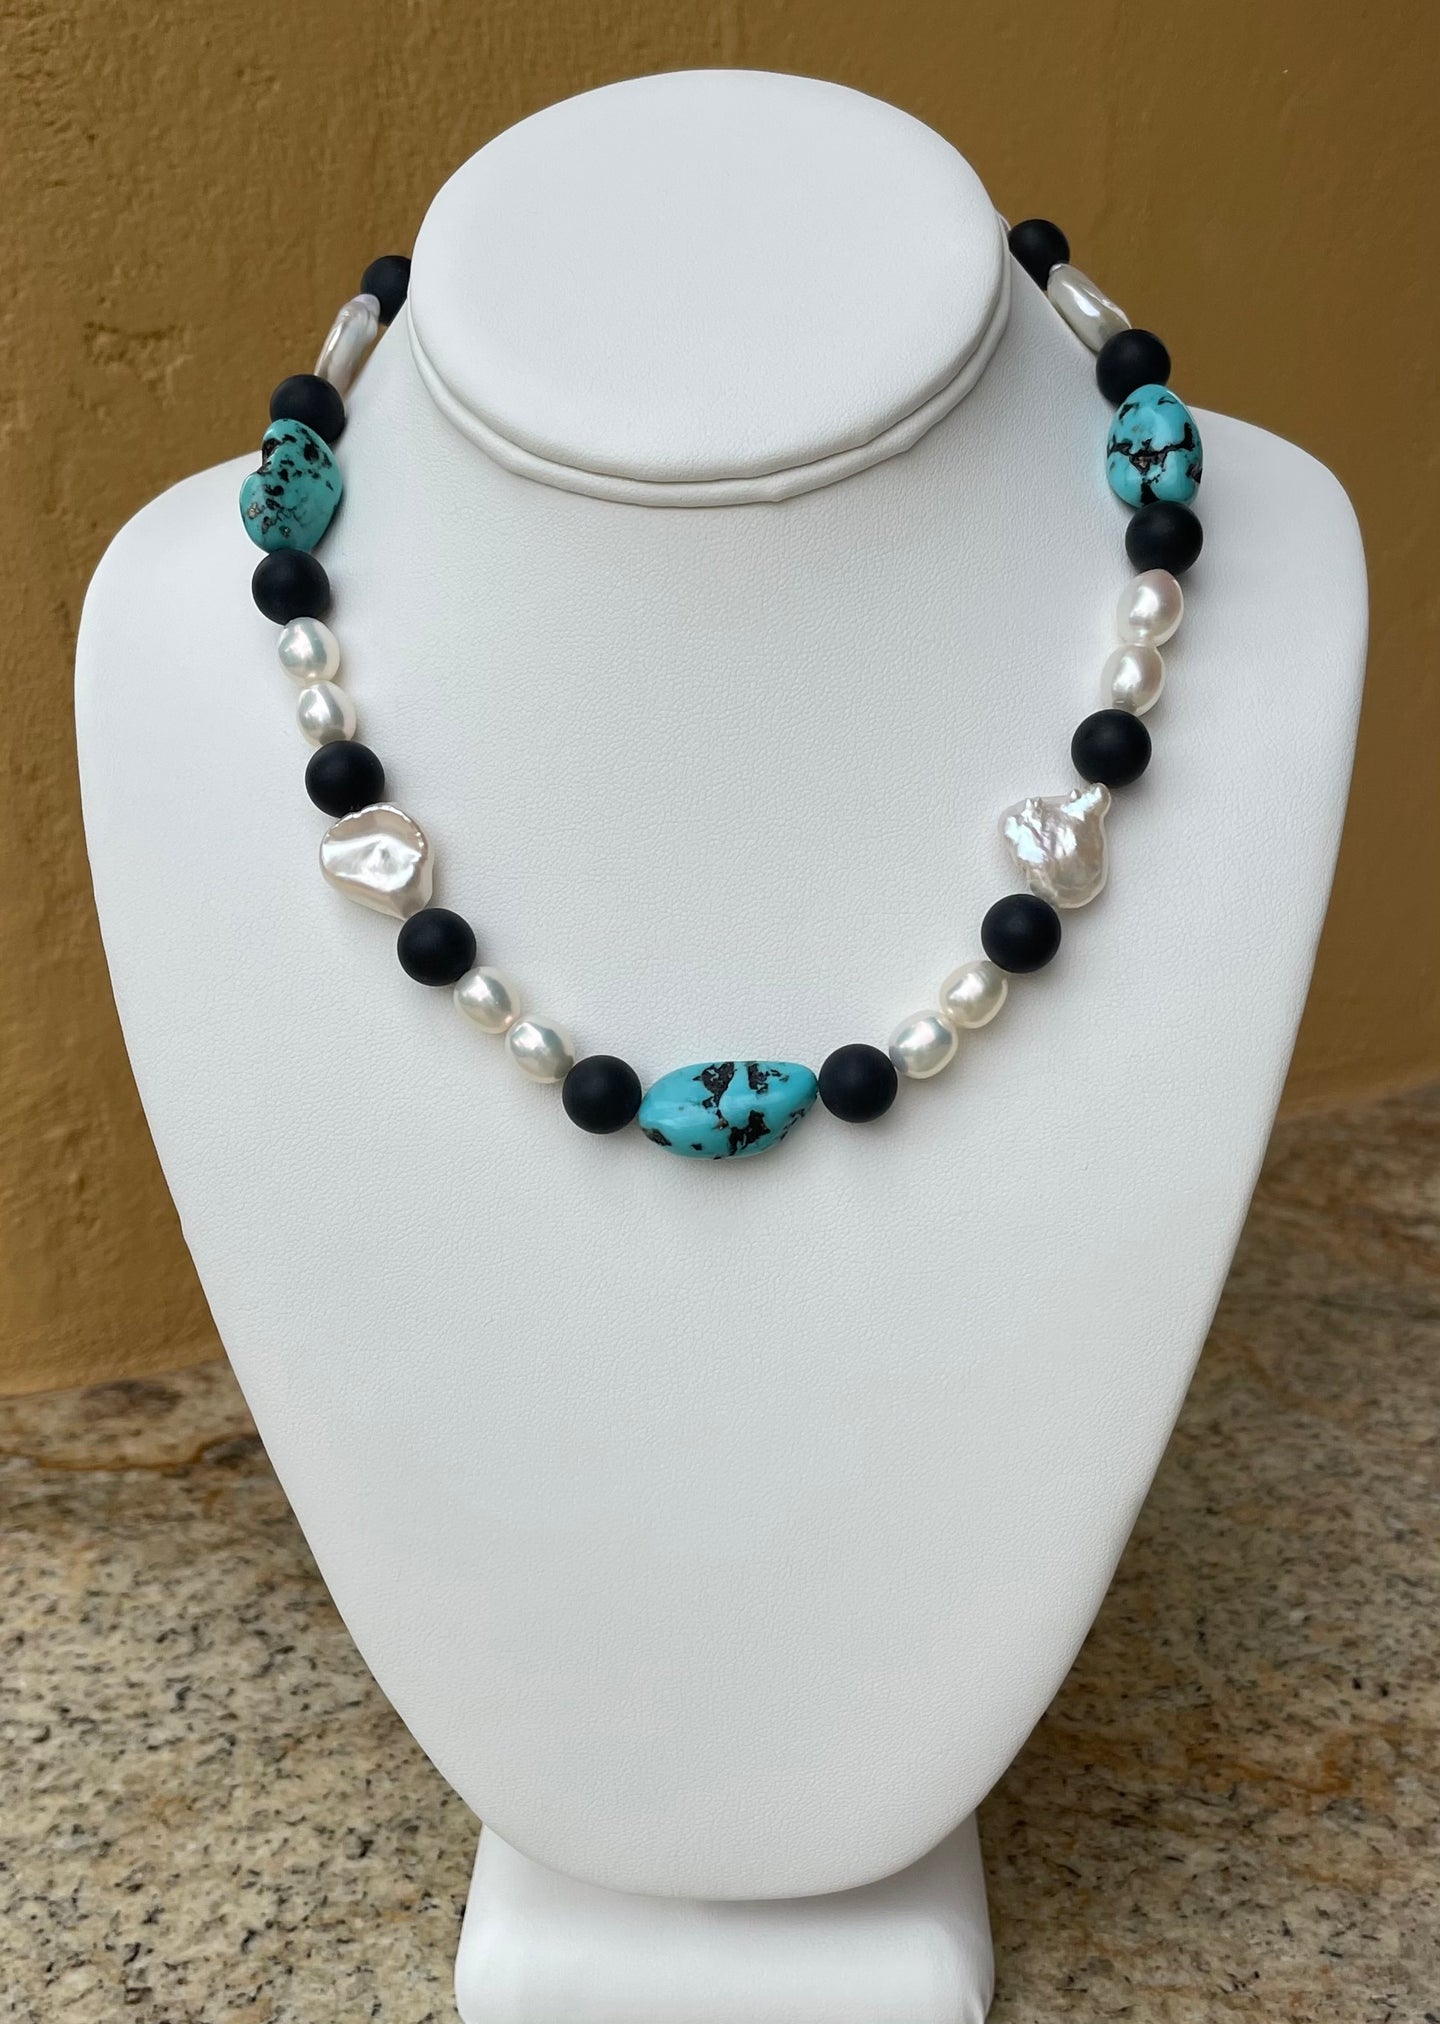 Necklace - Black, white pearls and turquoise